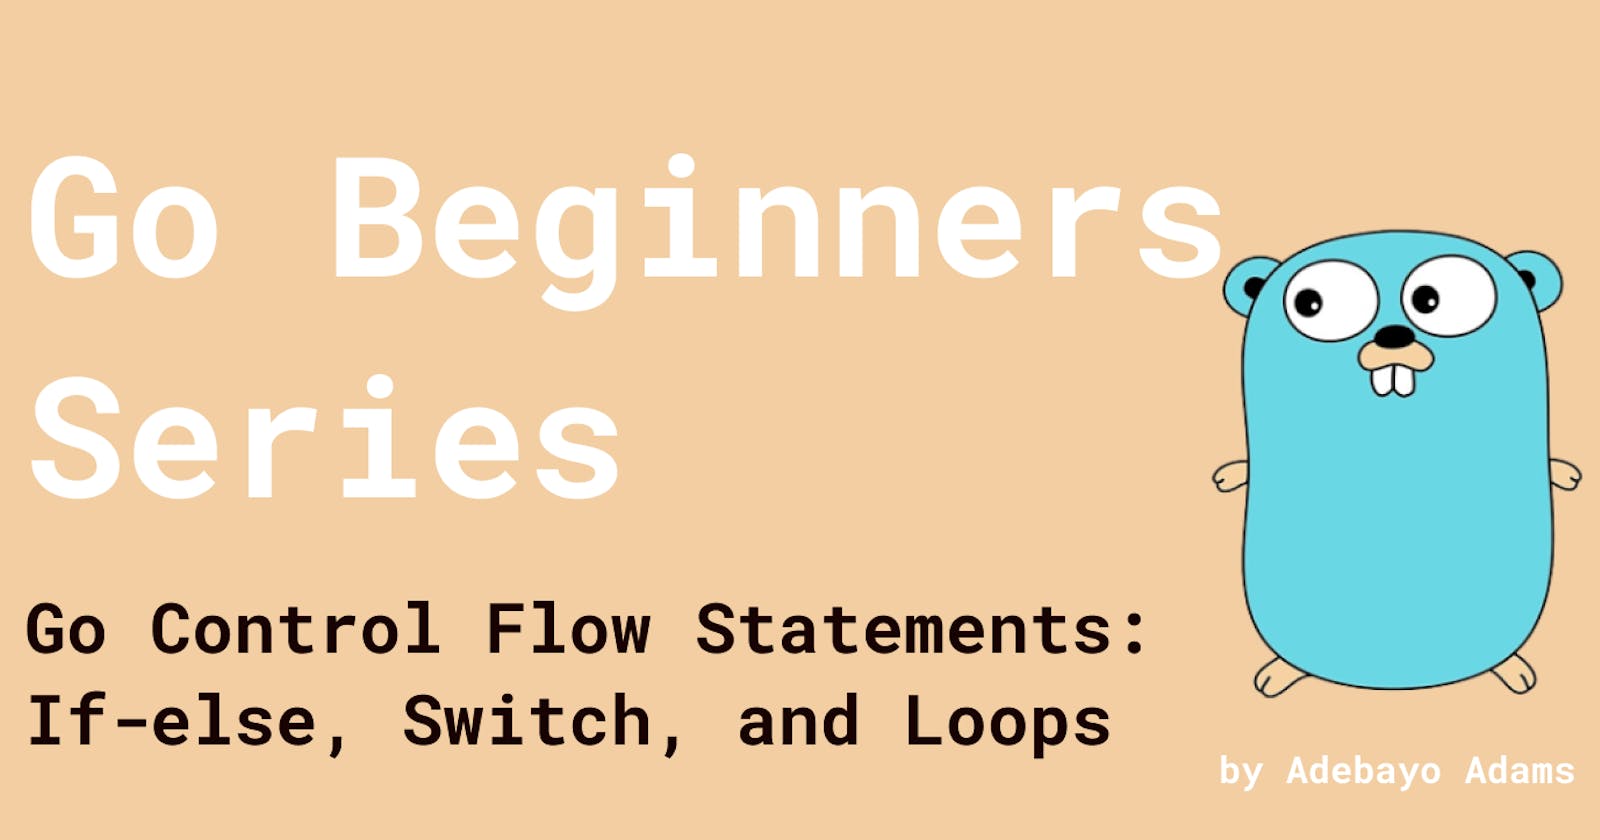 Go Beginners Series: Control Flow Statements: If-else, Switch, and Loops